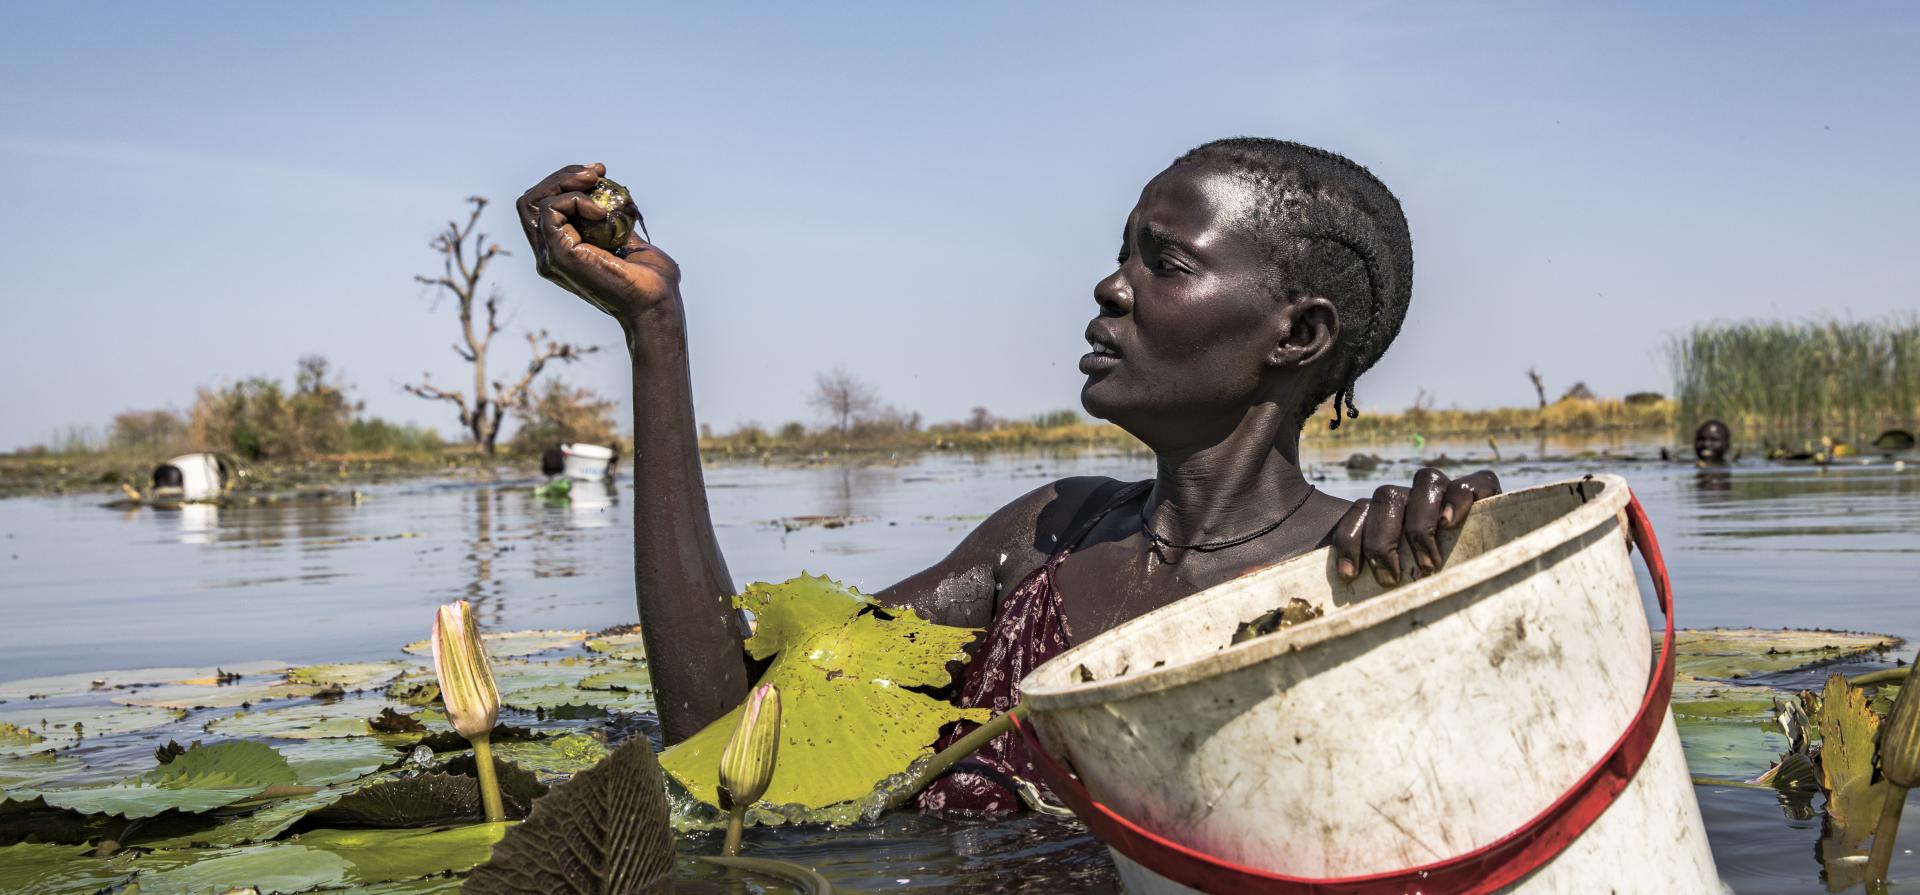 Nyayier Nyang Nai collects water lilies from floodwater, near the village of Nhier, South Sudan. She and other women from the village spend hours in the water harvesting the lilies. This is now one of their main sources of food as their livestock have perished and their former farmlands lie under metres of water. © UNHCR/Andrew McConnell